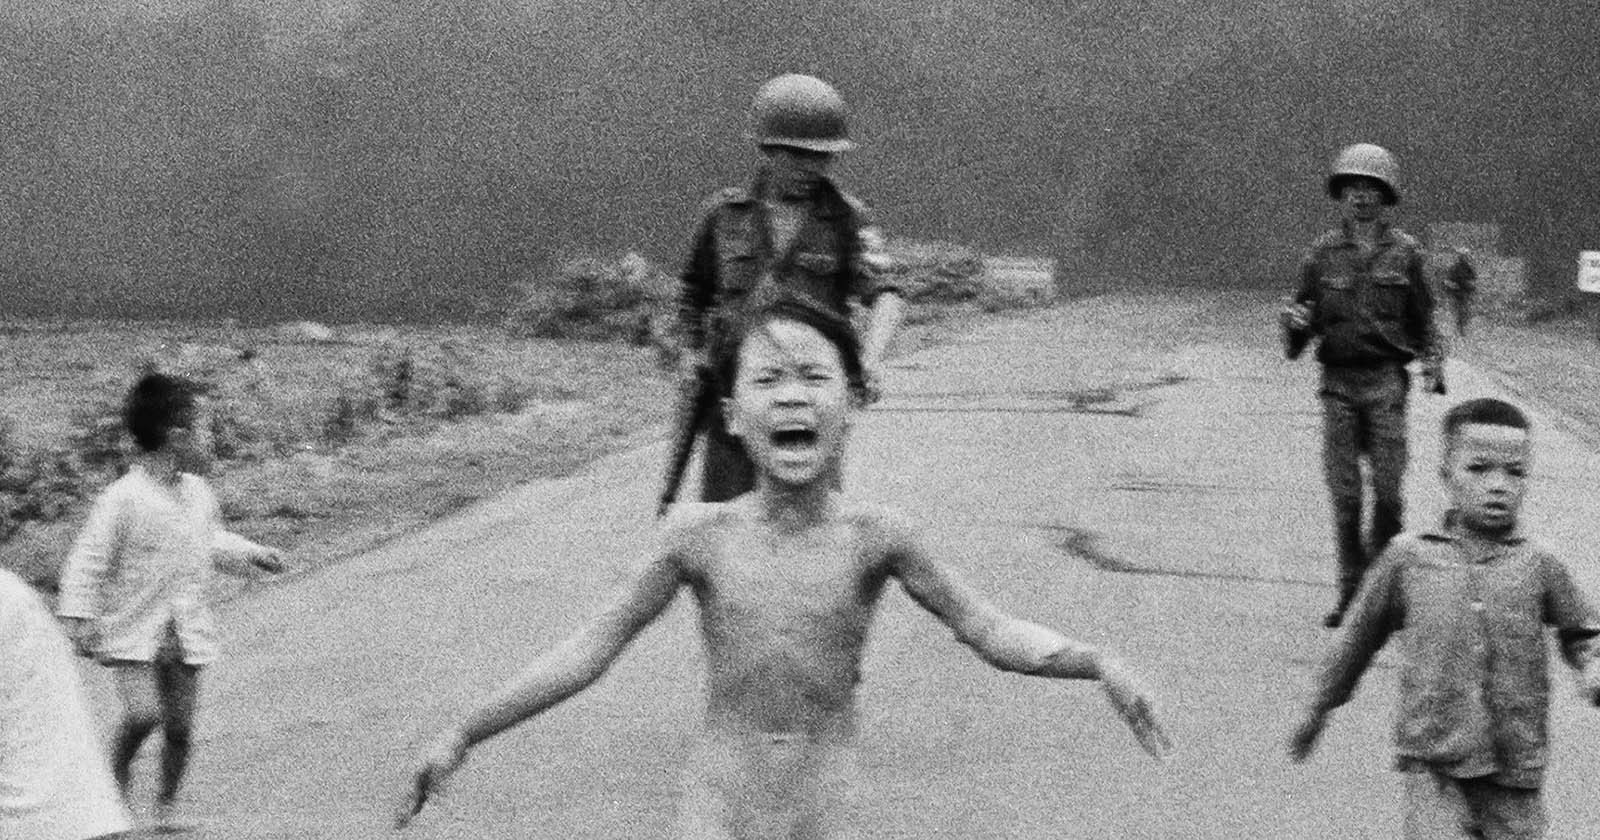  years after napalm girl myths distort reality 